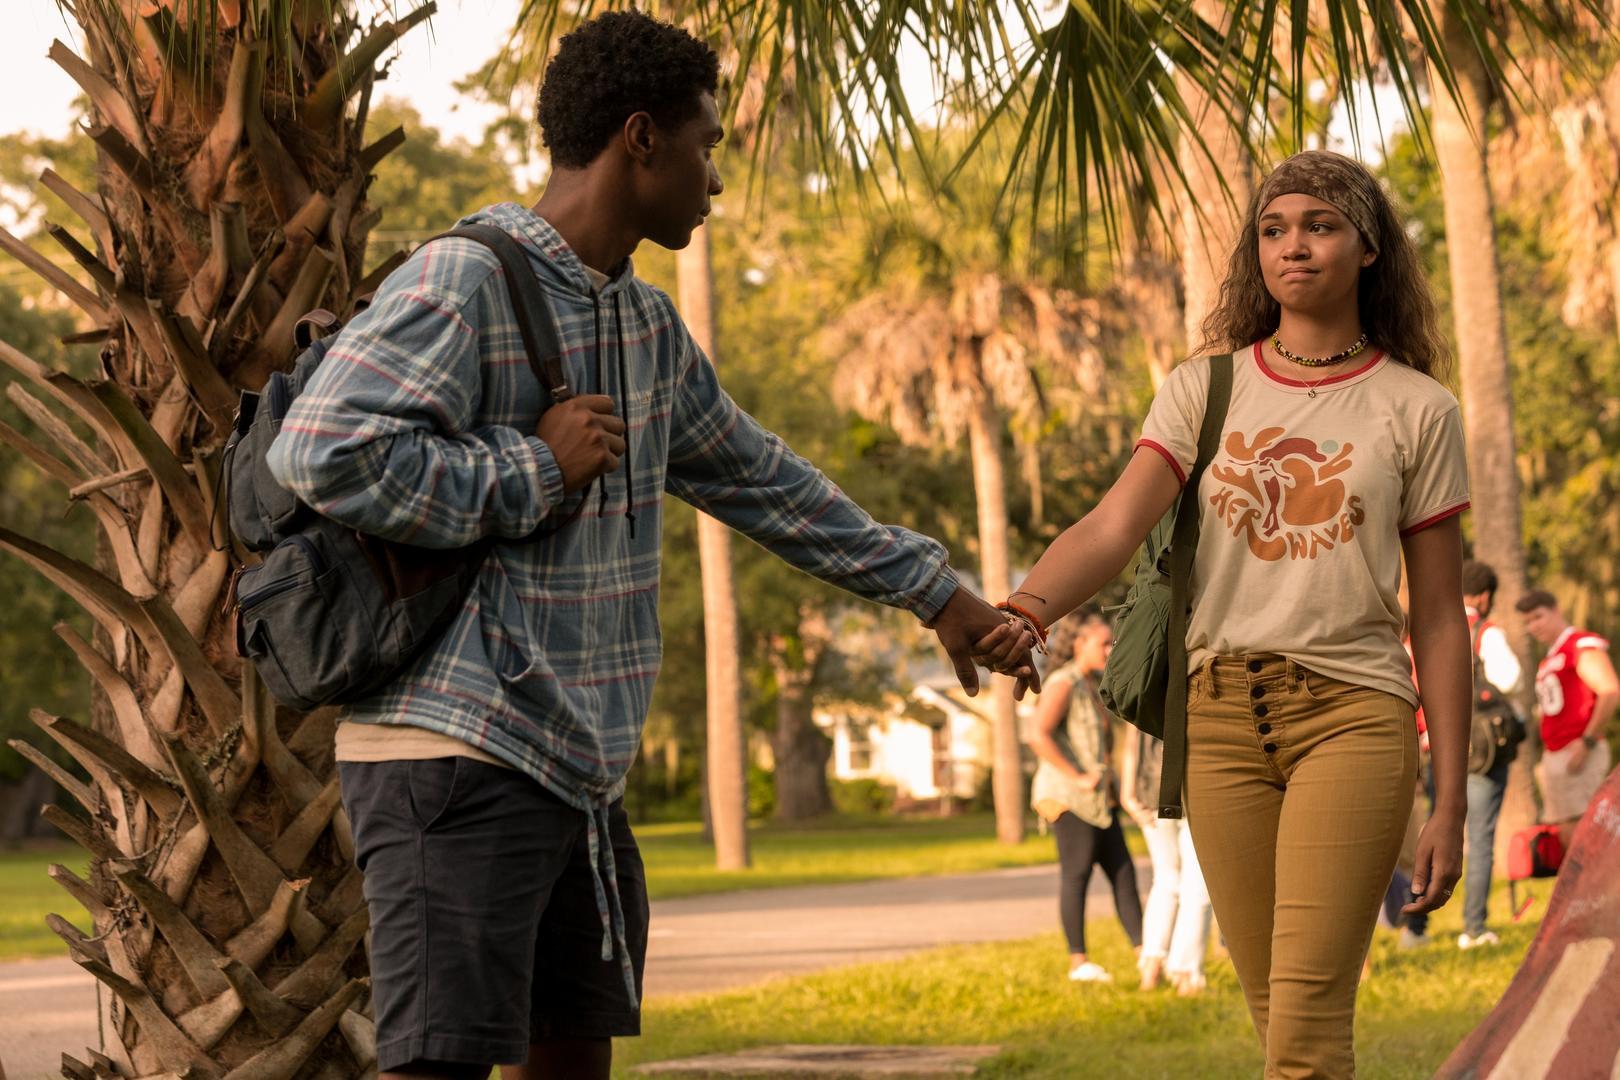 Pope (Jonathan Daviss) and Kiara (Madison Bailey) holding hands in 'Outer Banks' on Netflix